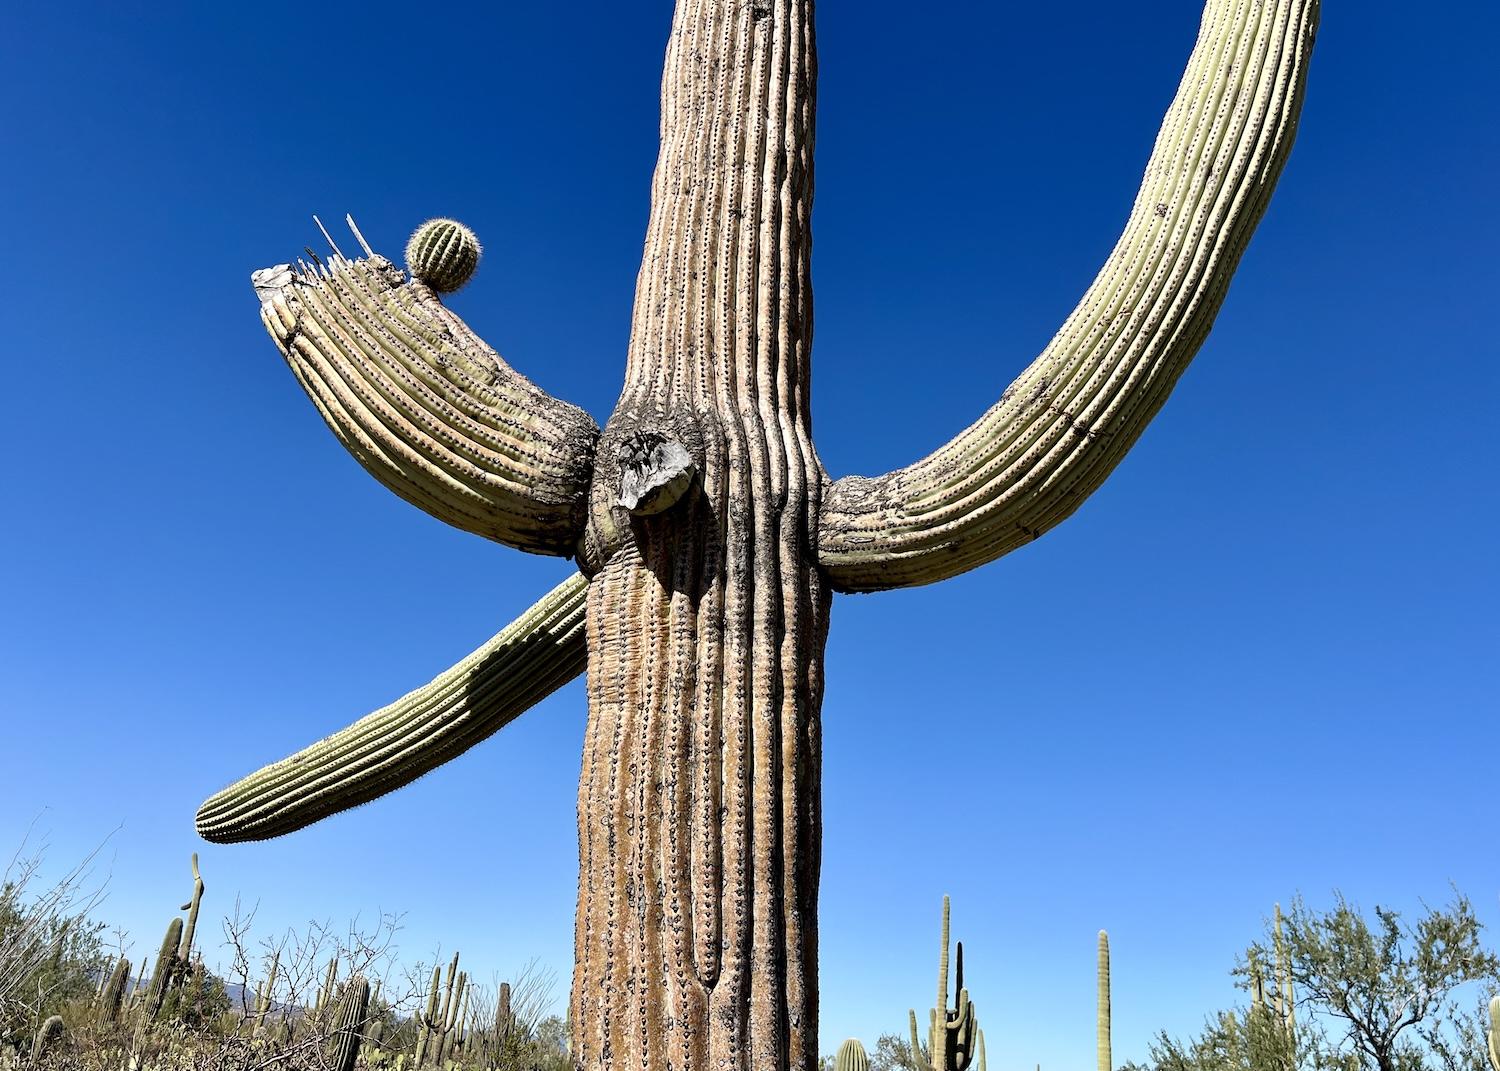 This memorable four-armed saguaro has old, young, broken and new arms.